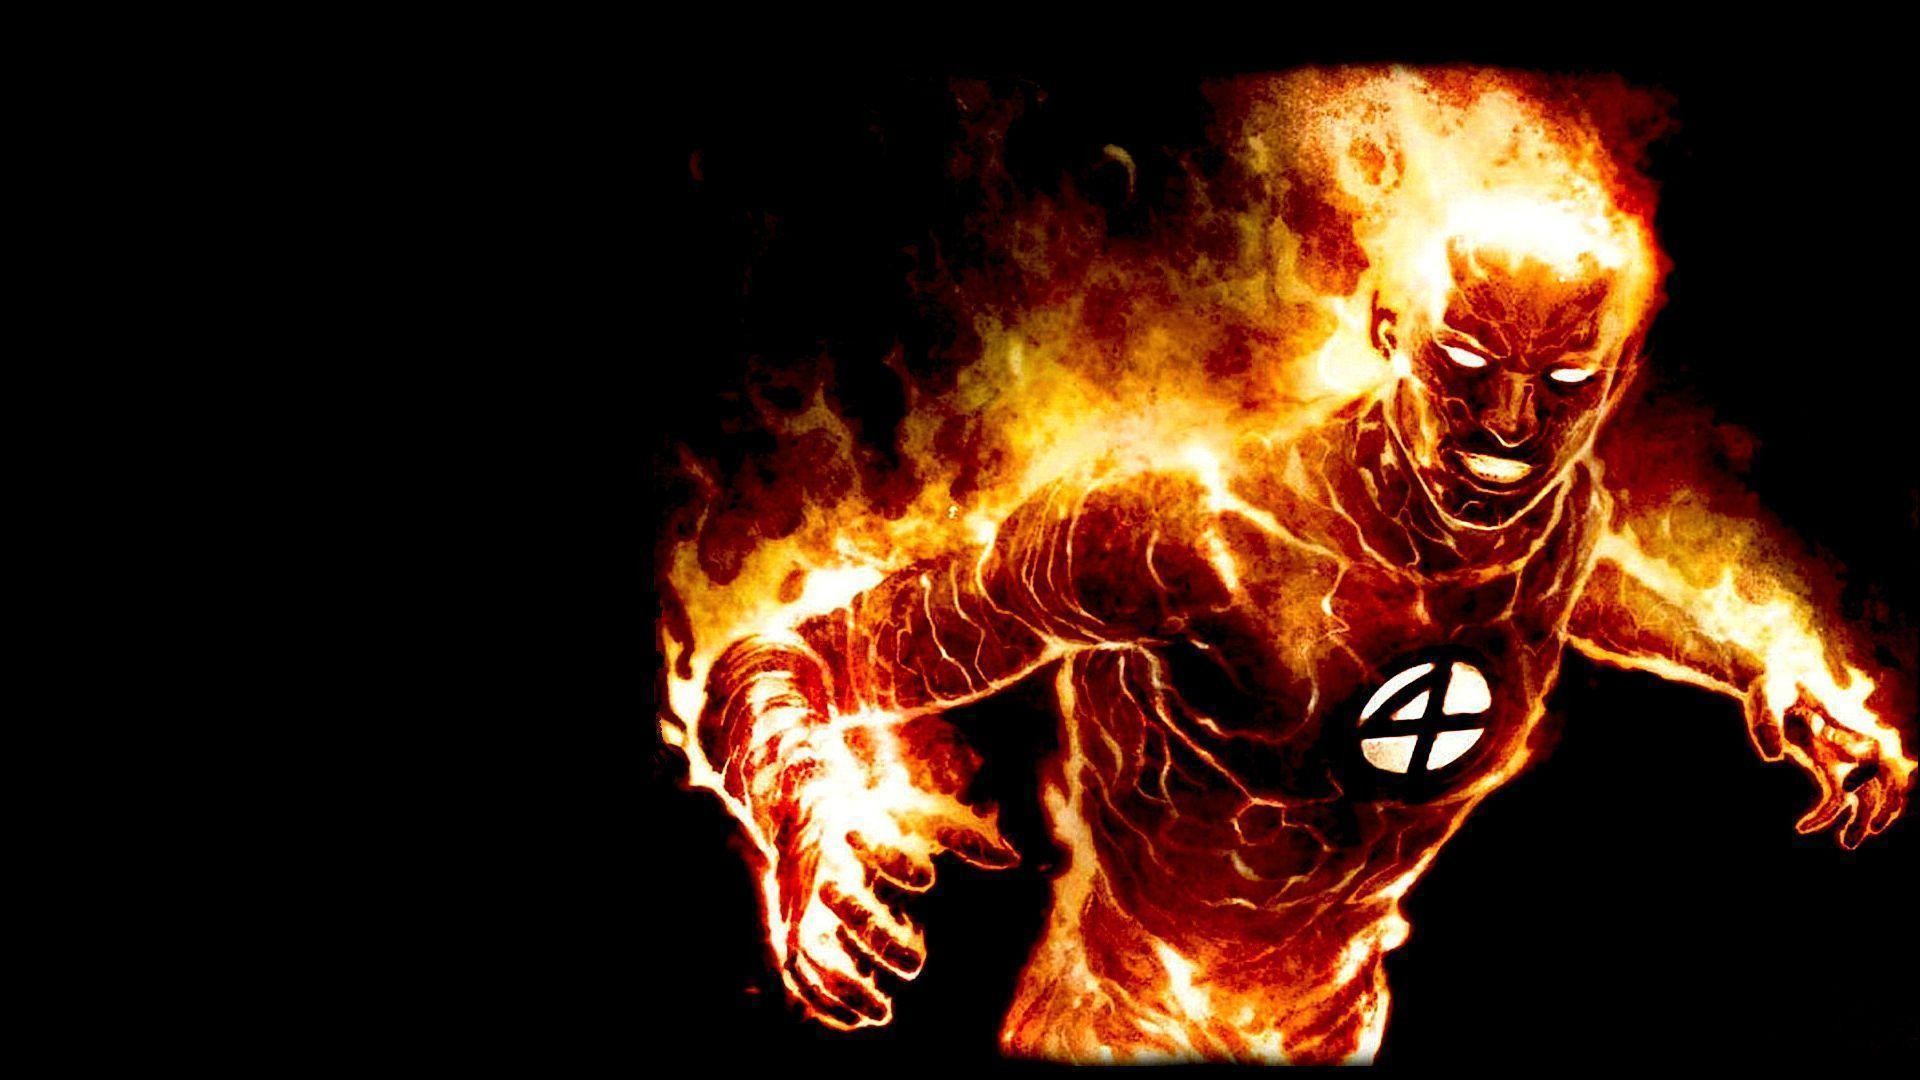 Human Torch Wallpaper 70 images